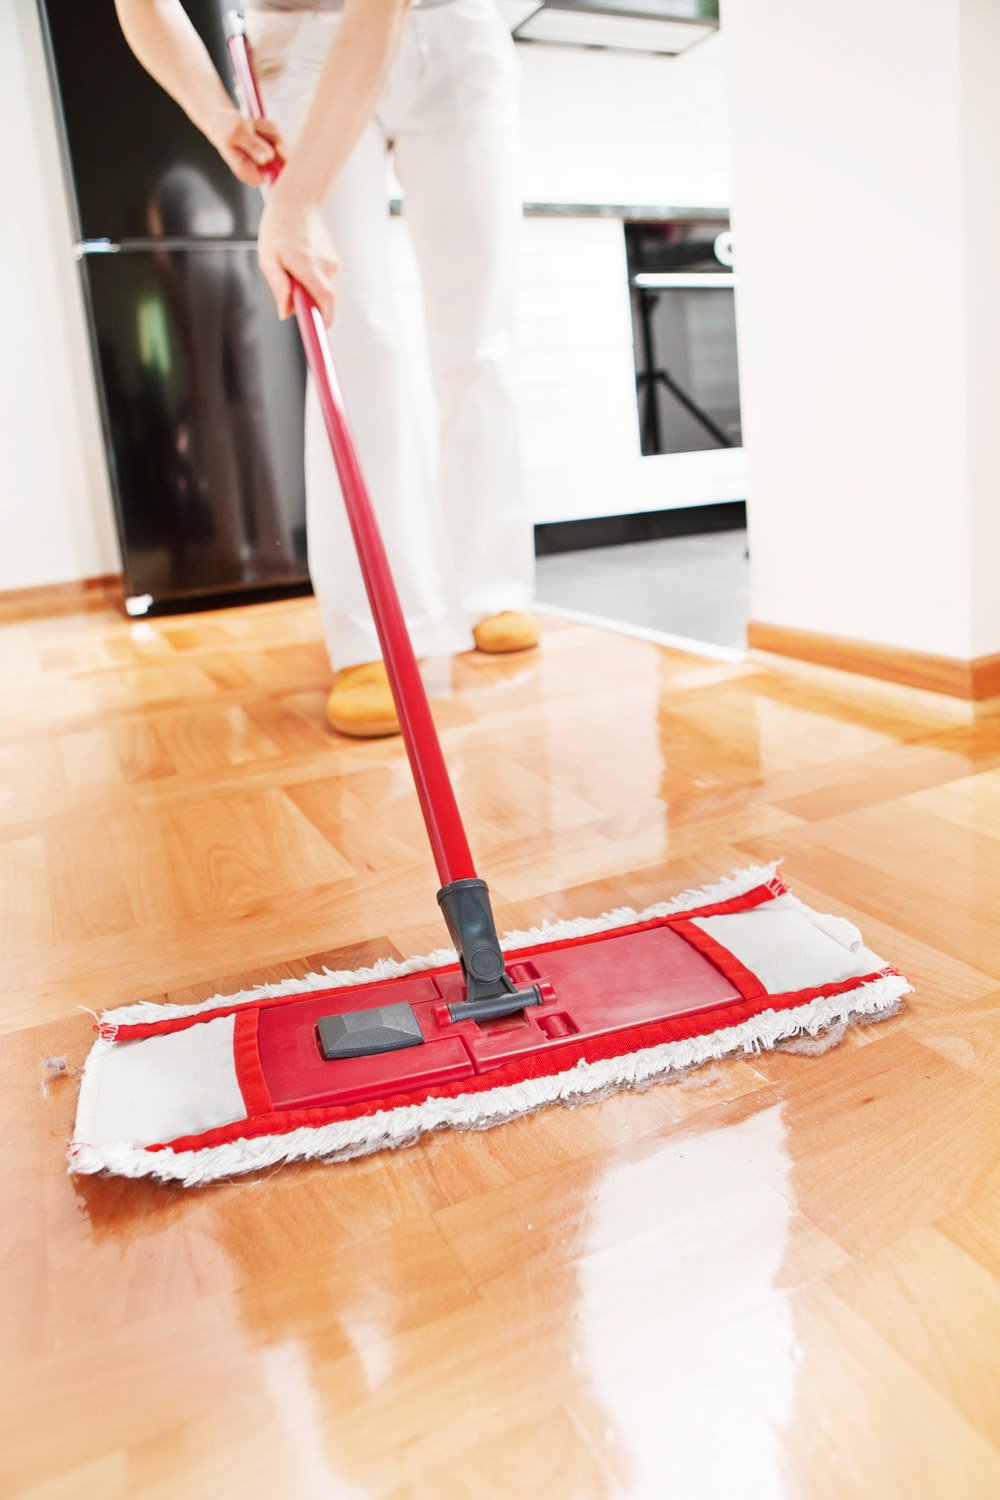 How to Care for Wooden Floors | Stay at Home Mum.com.au